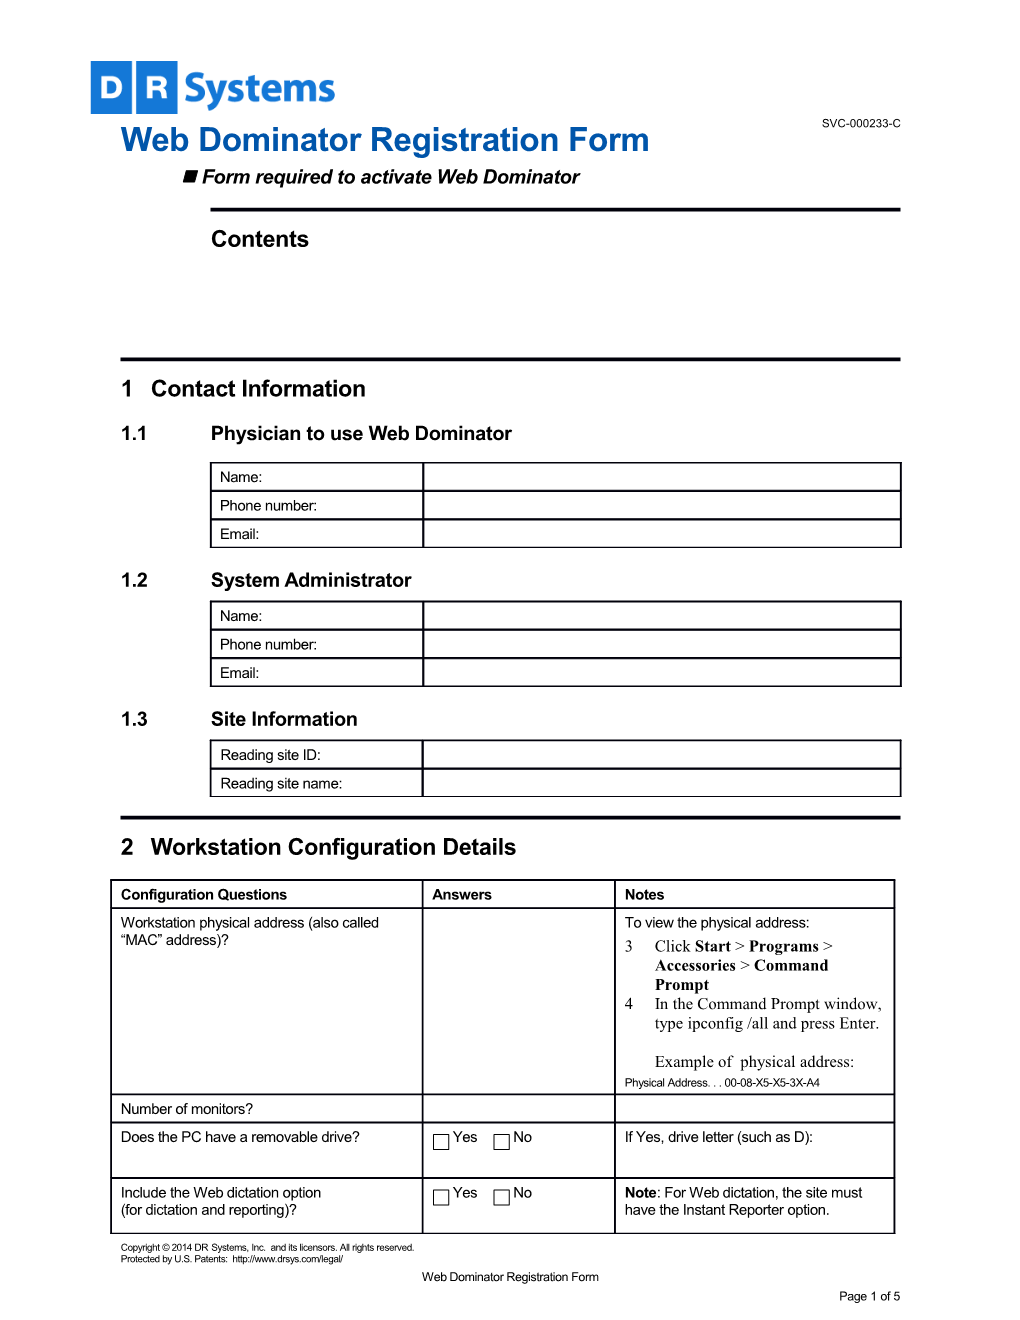 Form Required to Activate Web Dominator